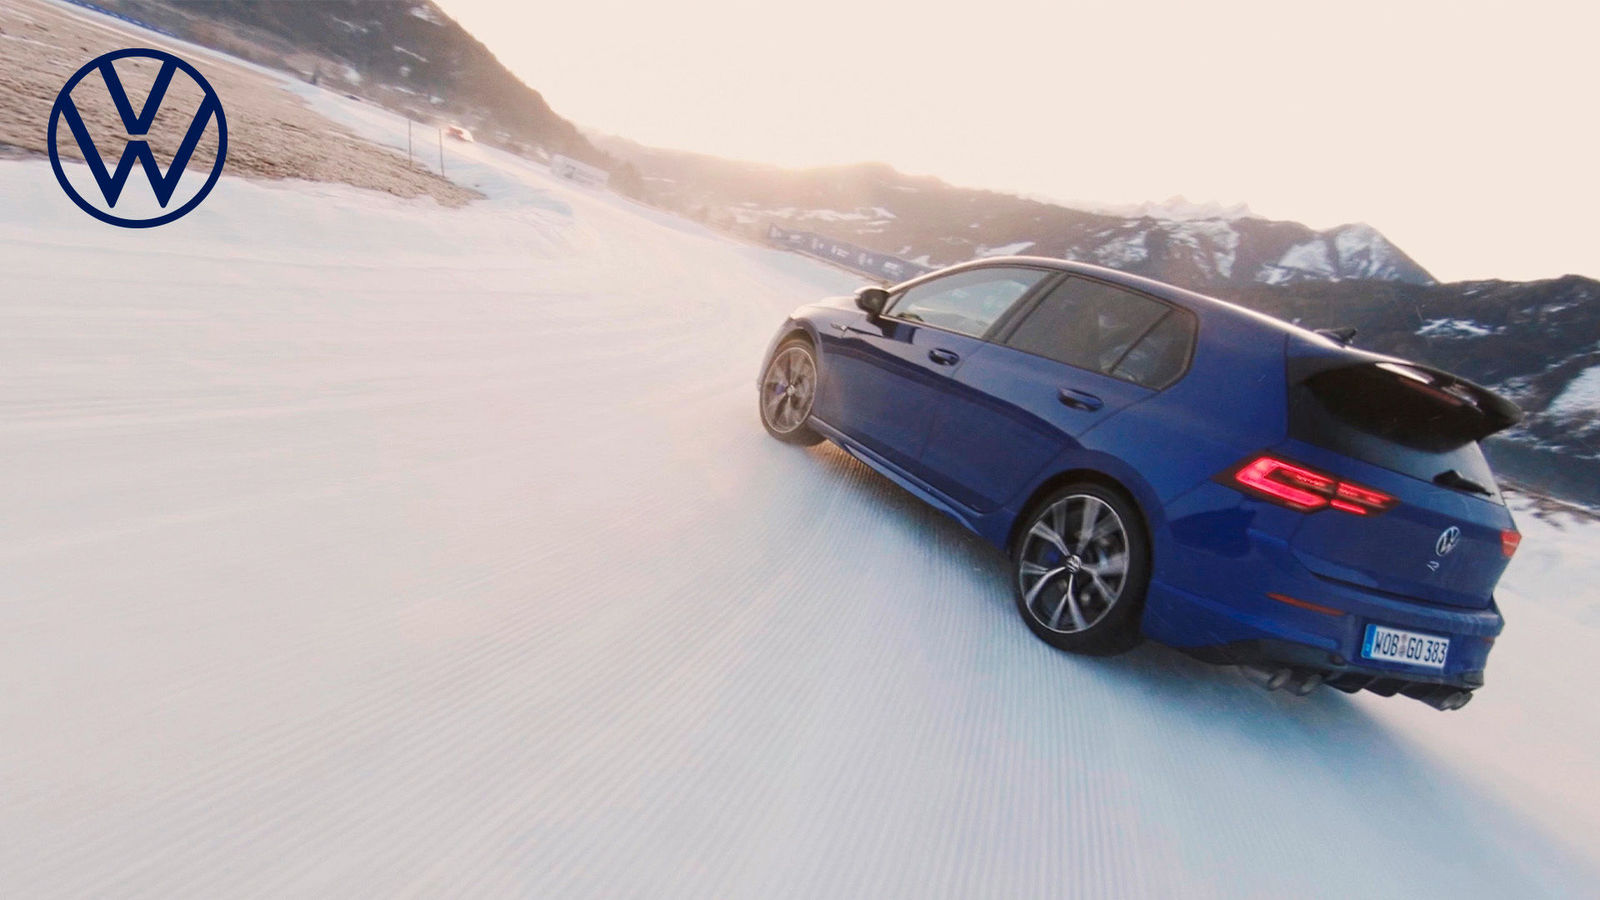 Story: Golf R-oad trip: On the road with Jasmin Preisig